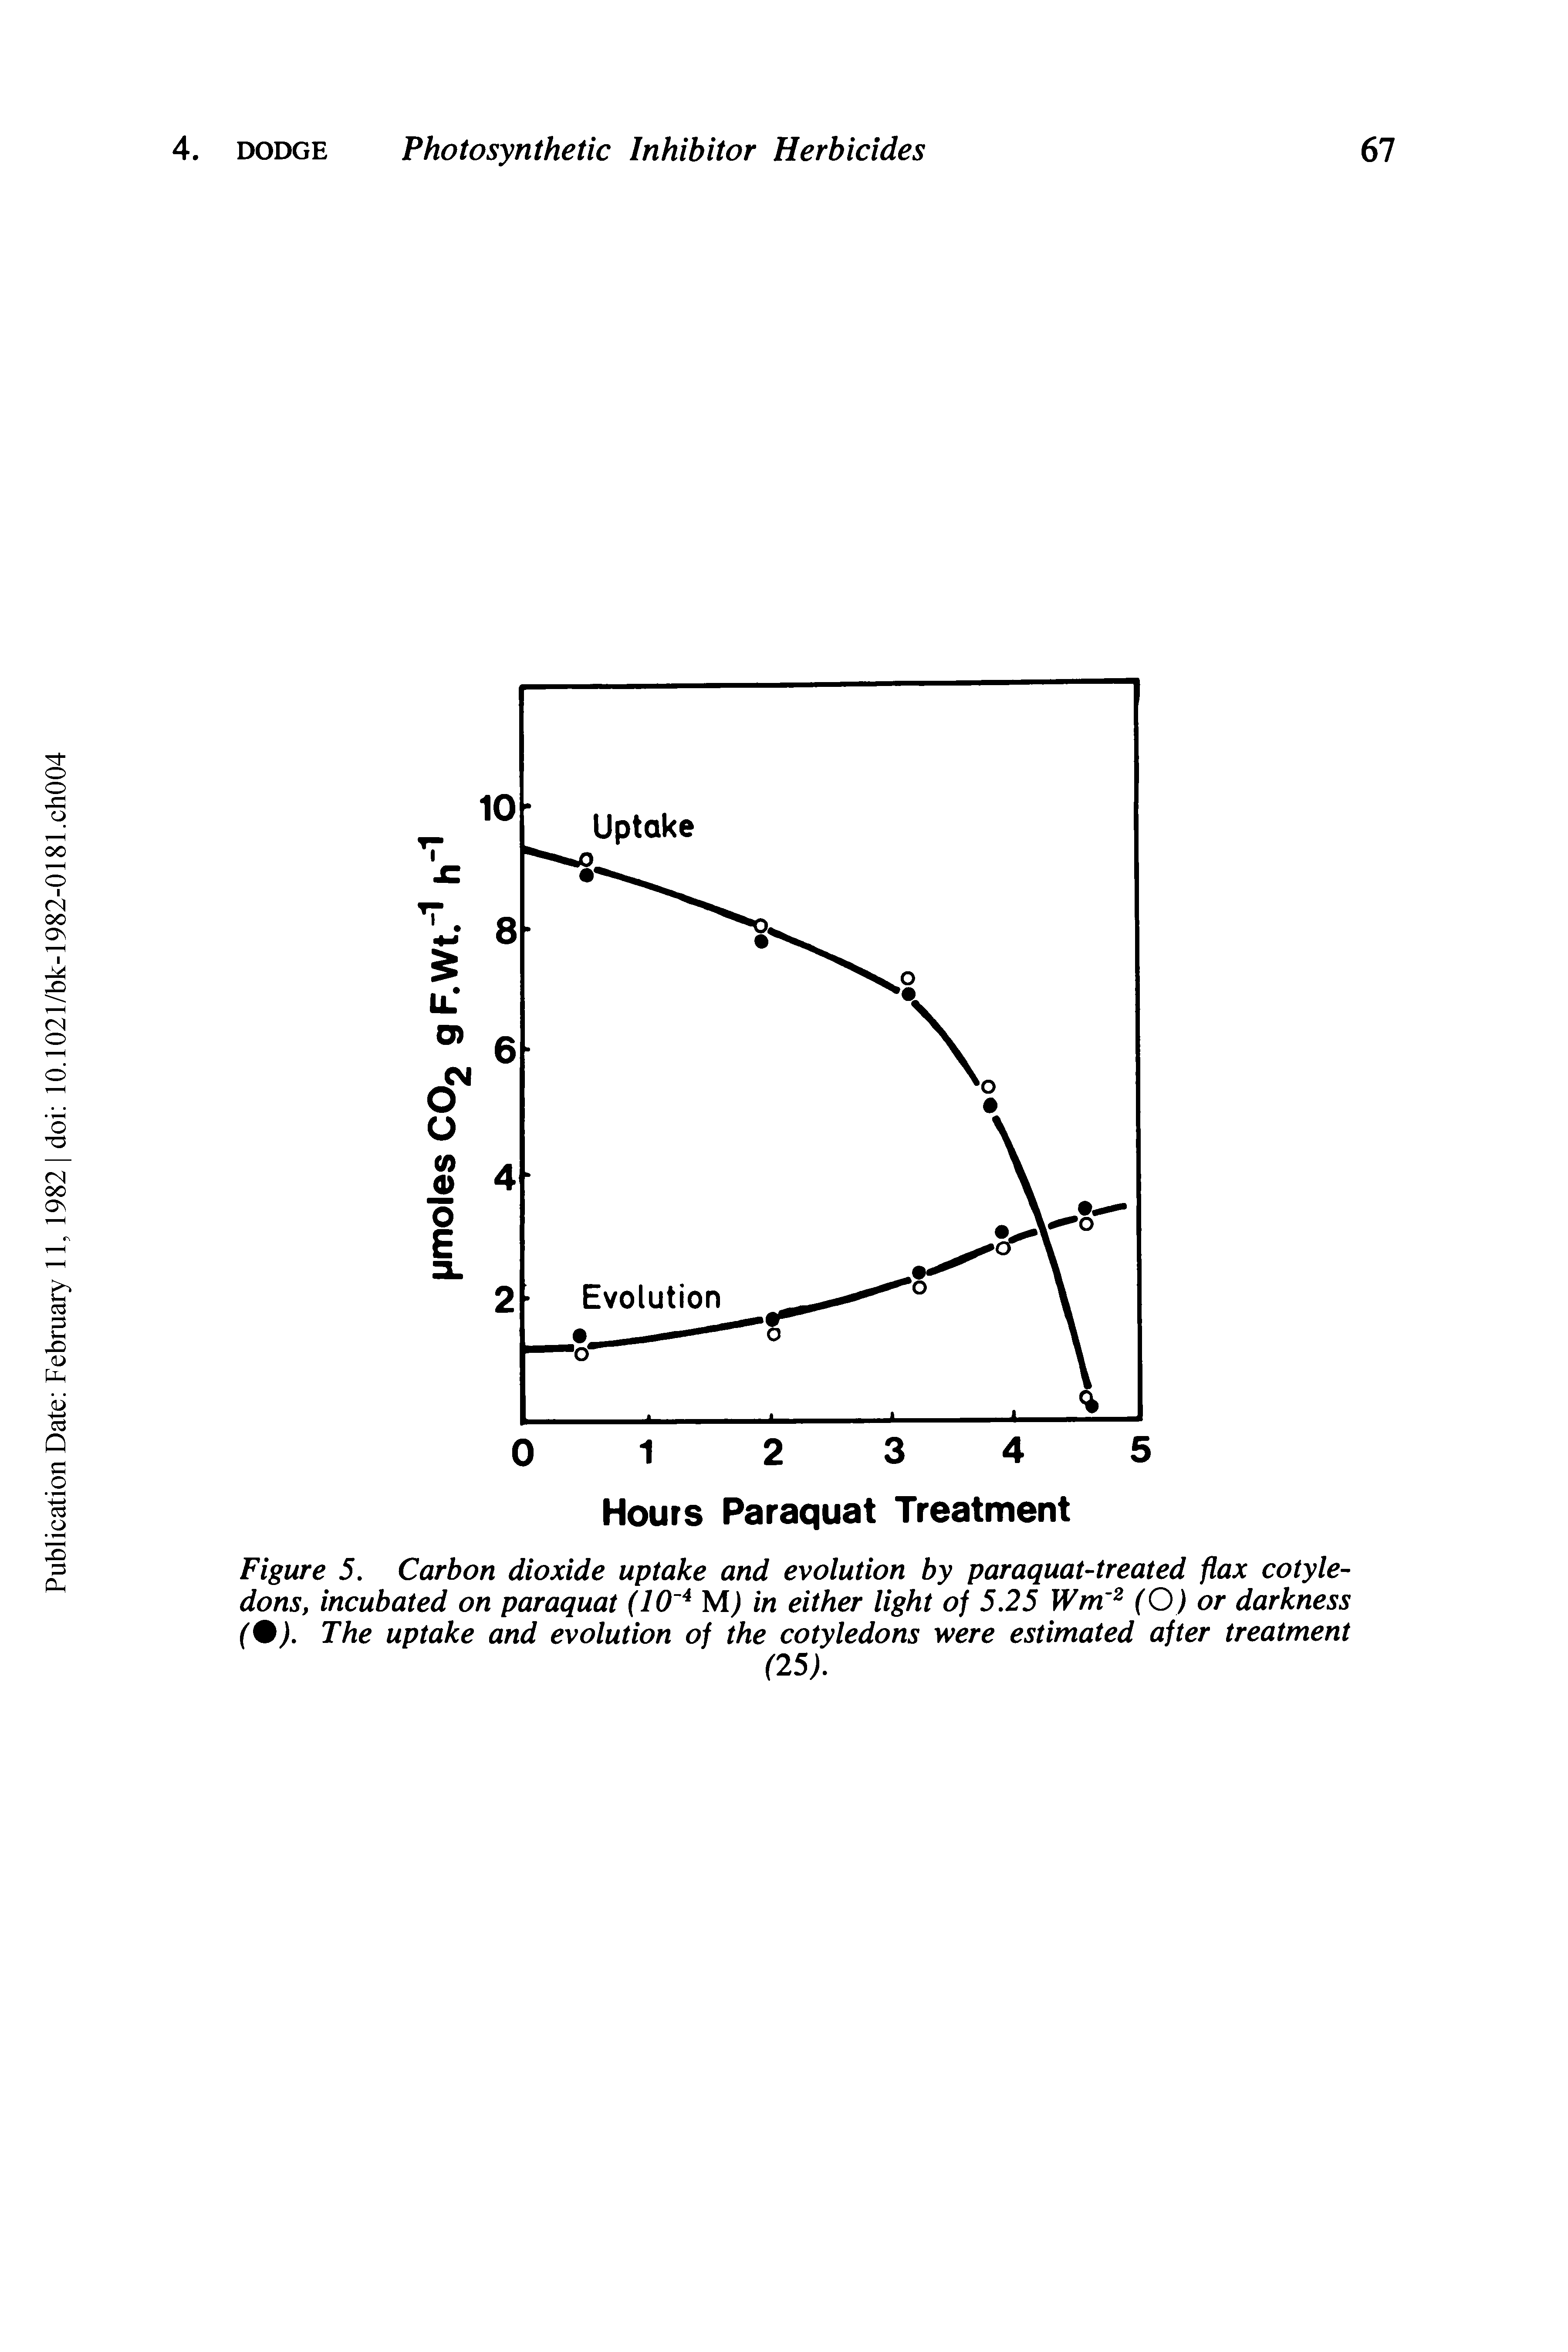 Figure 5. Carbon dioxide uptake and evolution by paraquat-treated flax cotyledons, incubated on paraquat in either light of 5.25 Wm (O) or darkness...